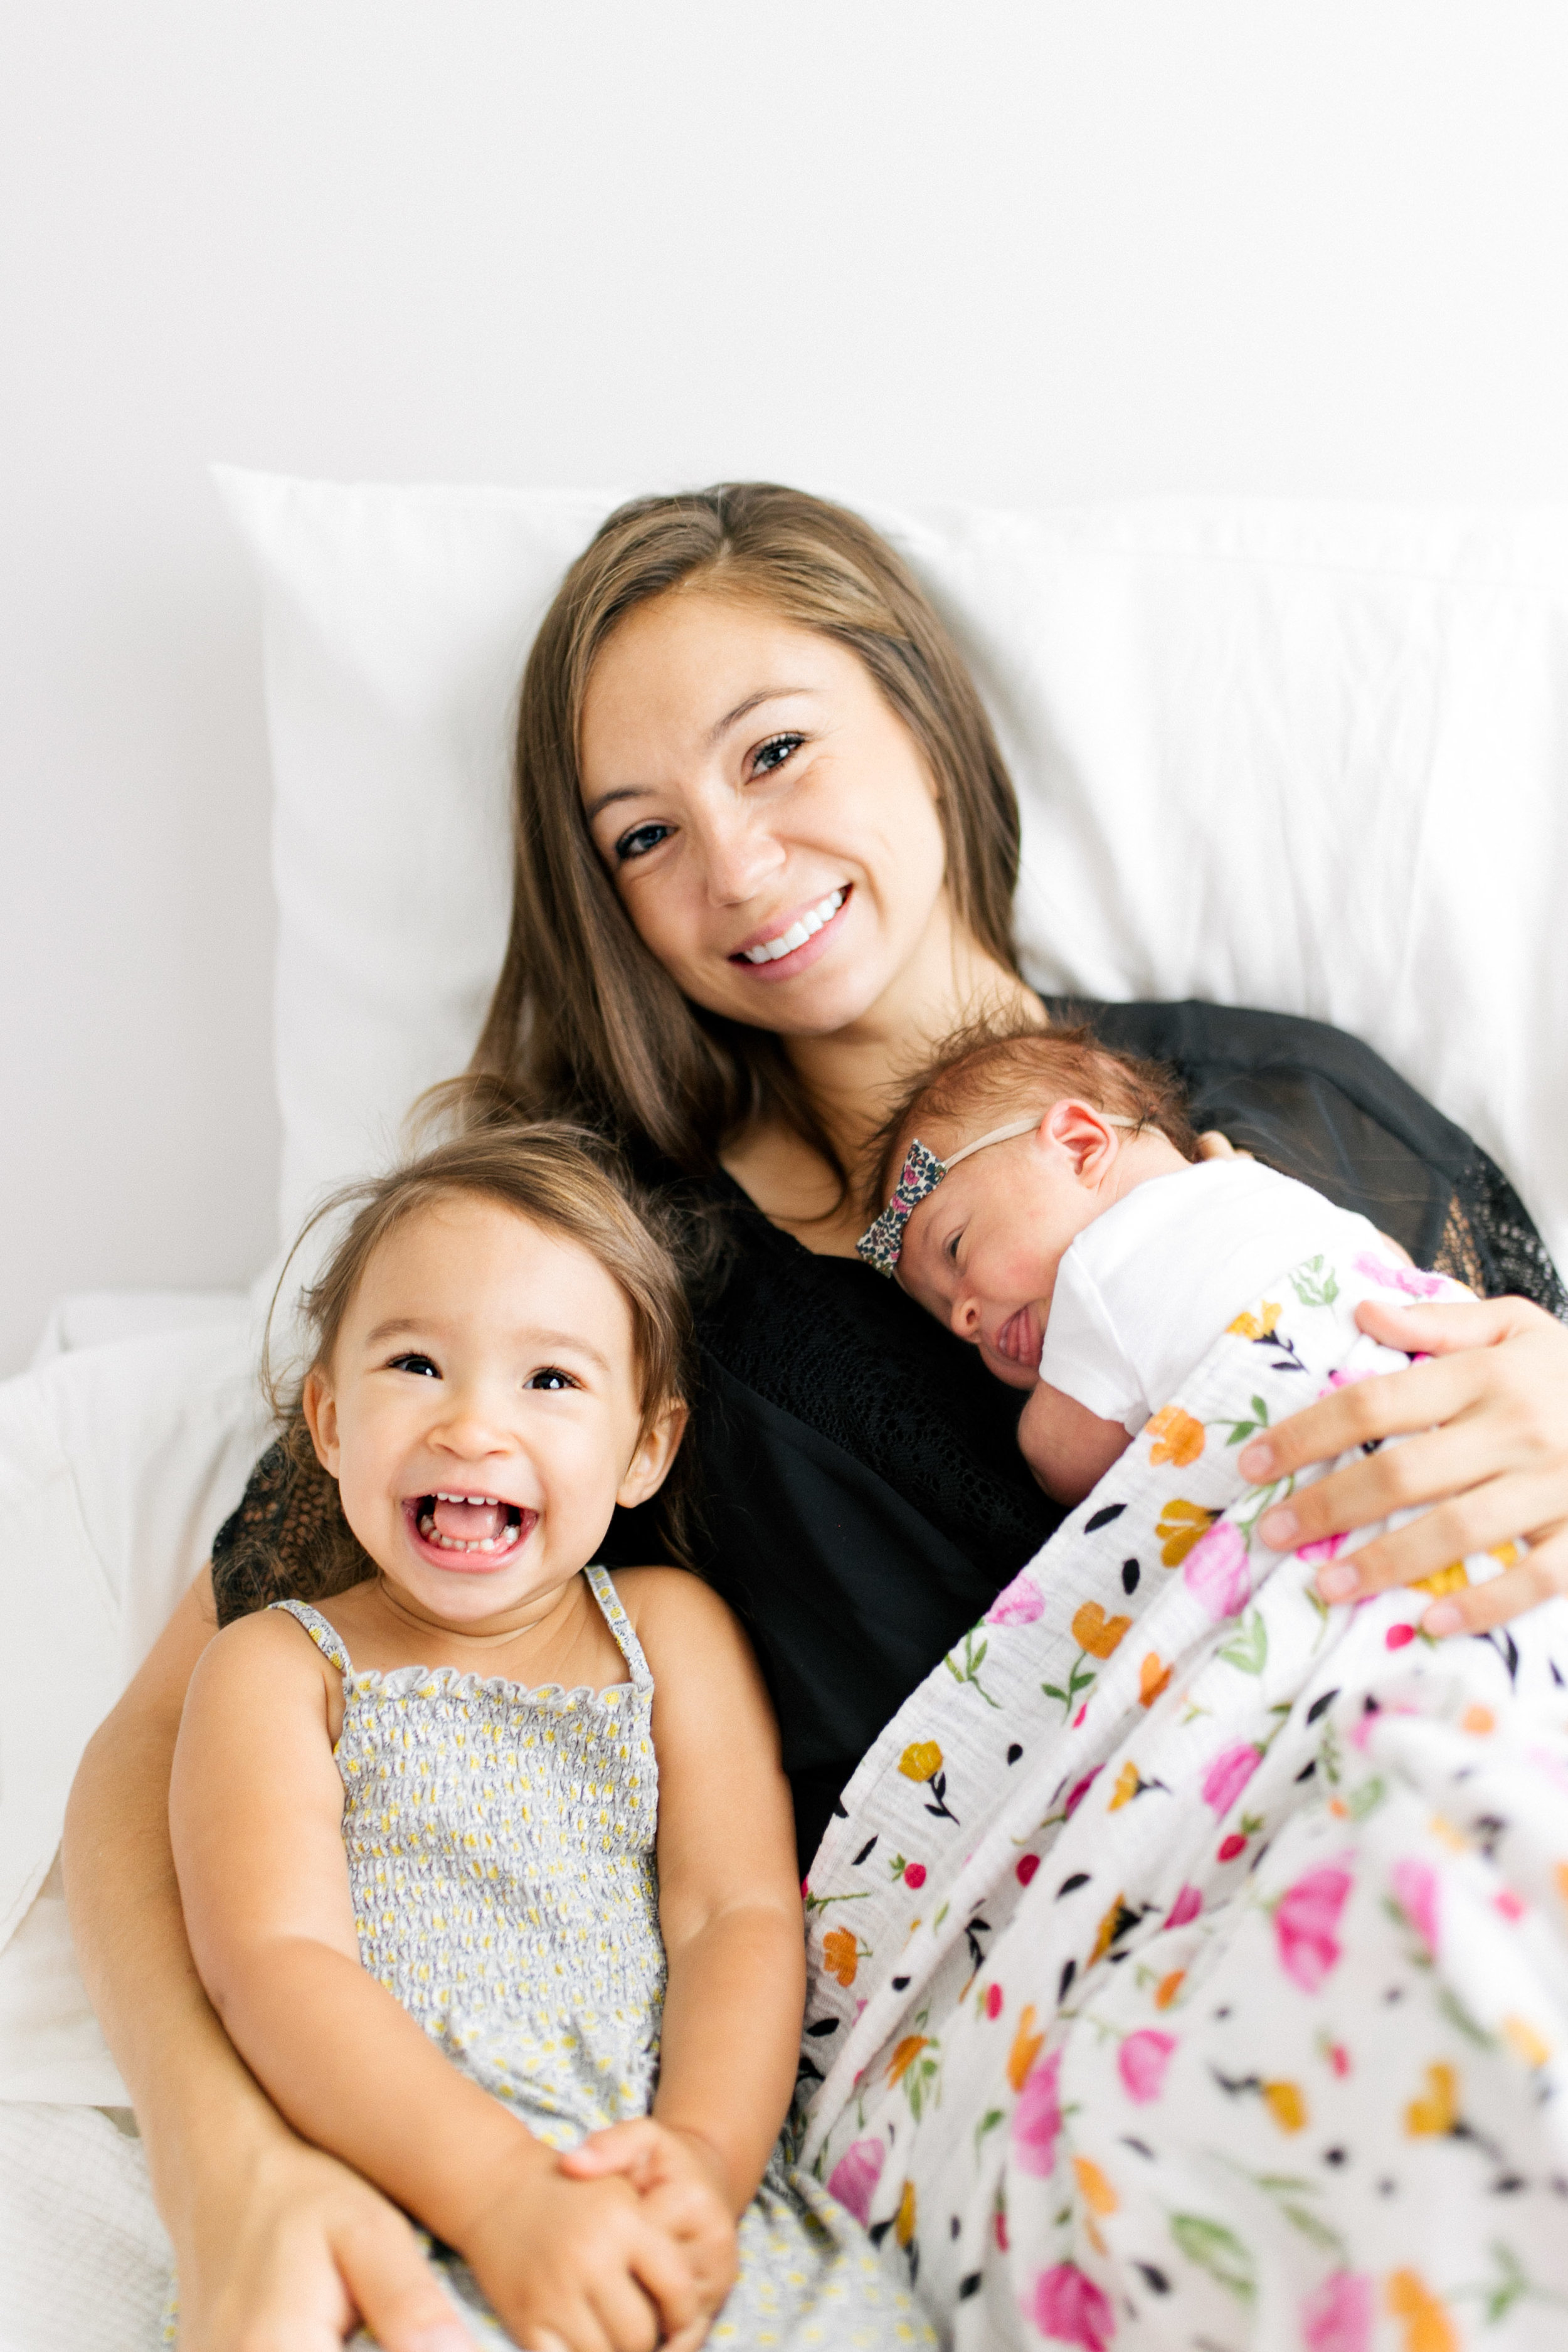 Newborn Family Session, Natural Light in Home, toddler in house lifestyle | Chelsea Macor Photography Seattle WA-29.jpg